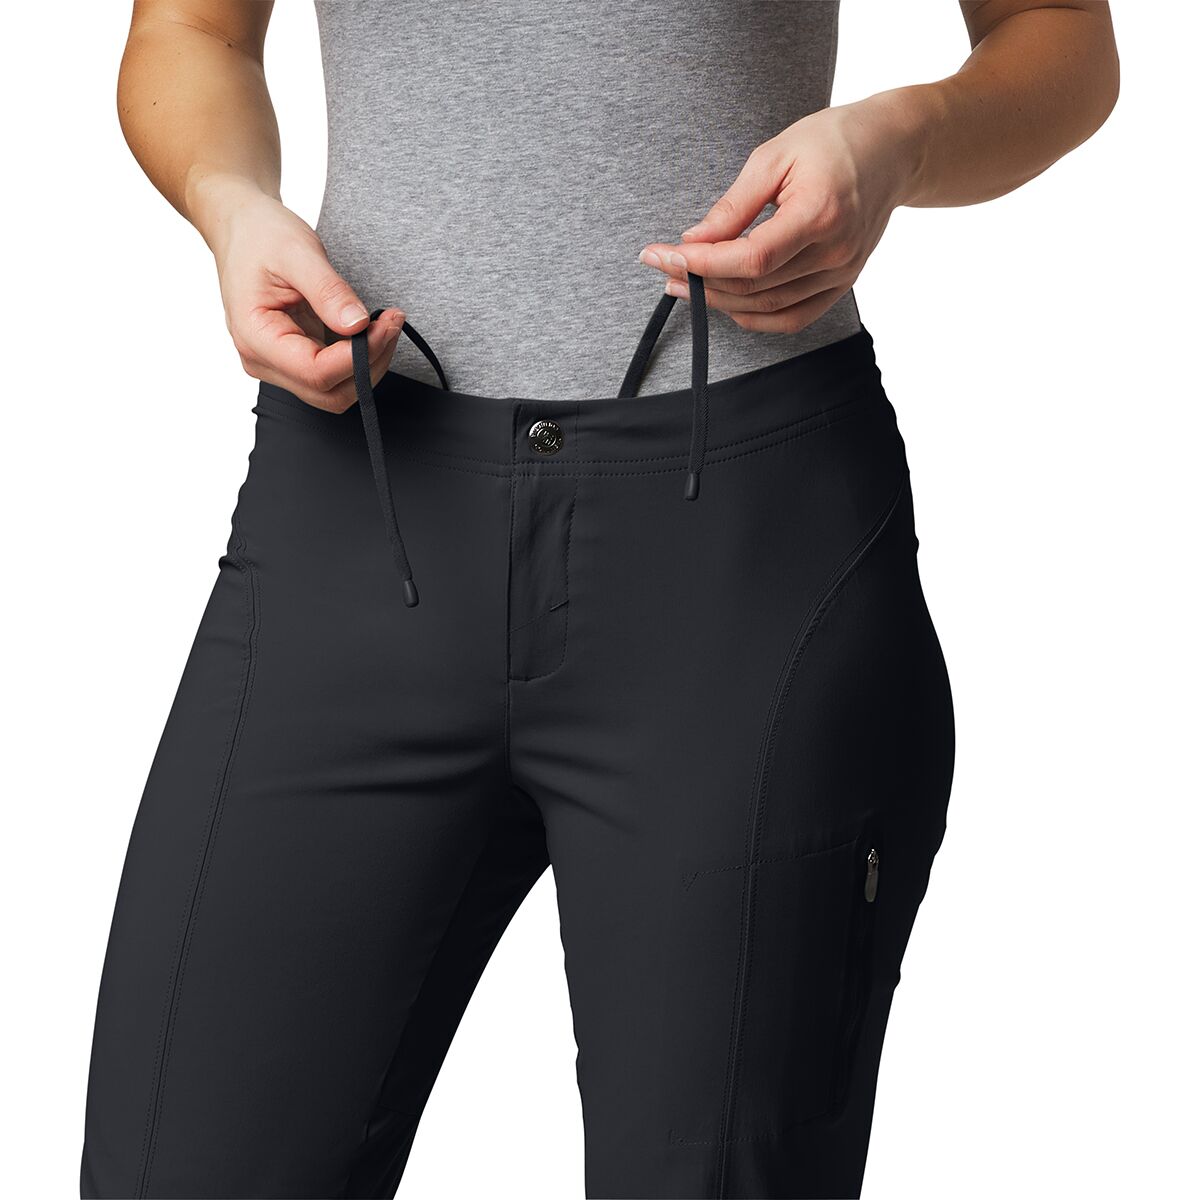 NEW Columbia Omni Shade Women's Straight Leg Active Fit Pants (Black,Small)